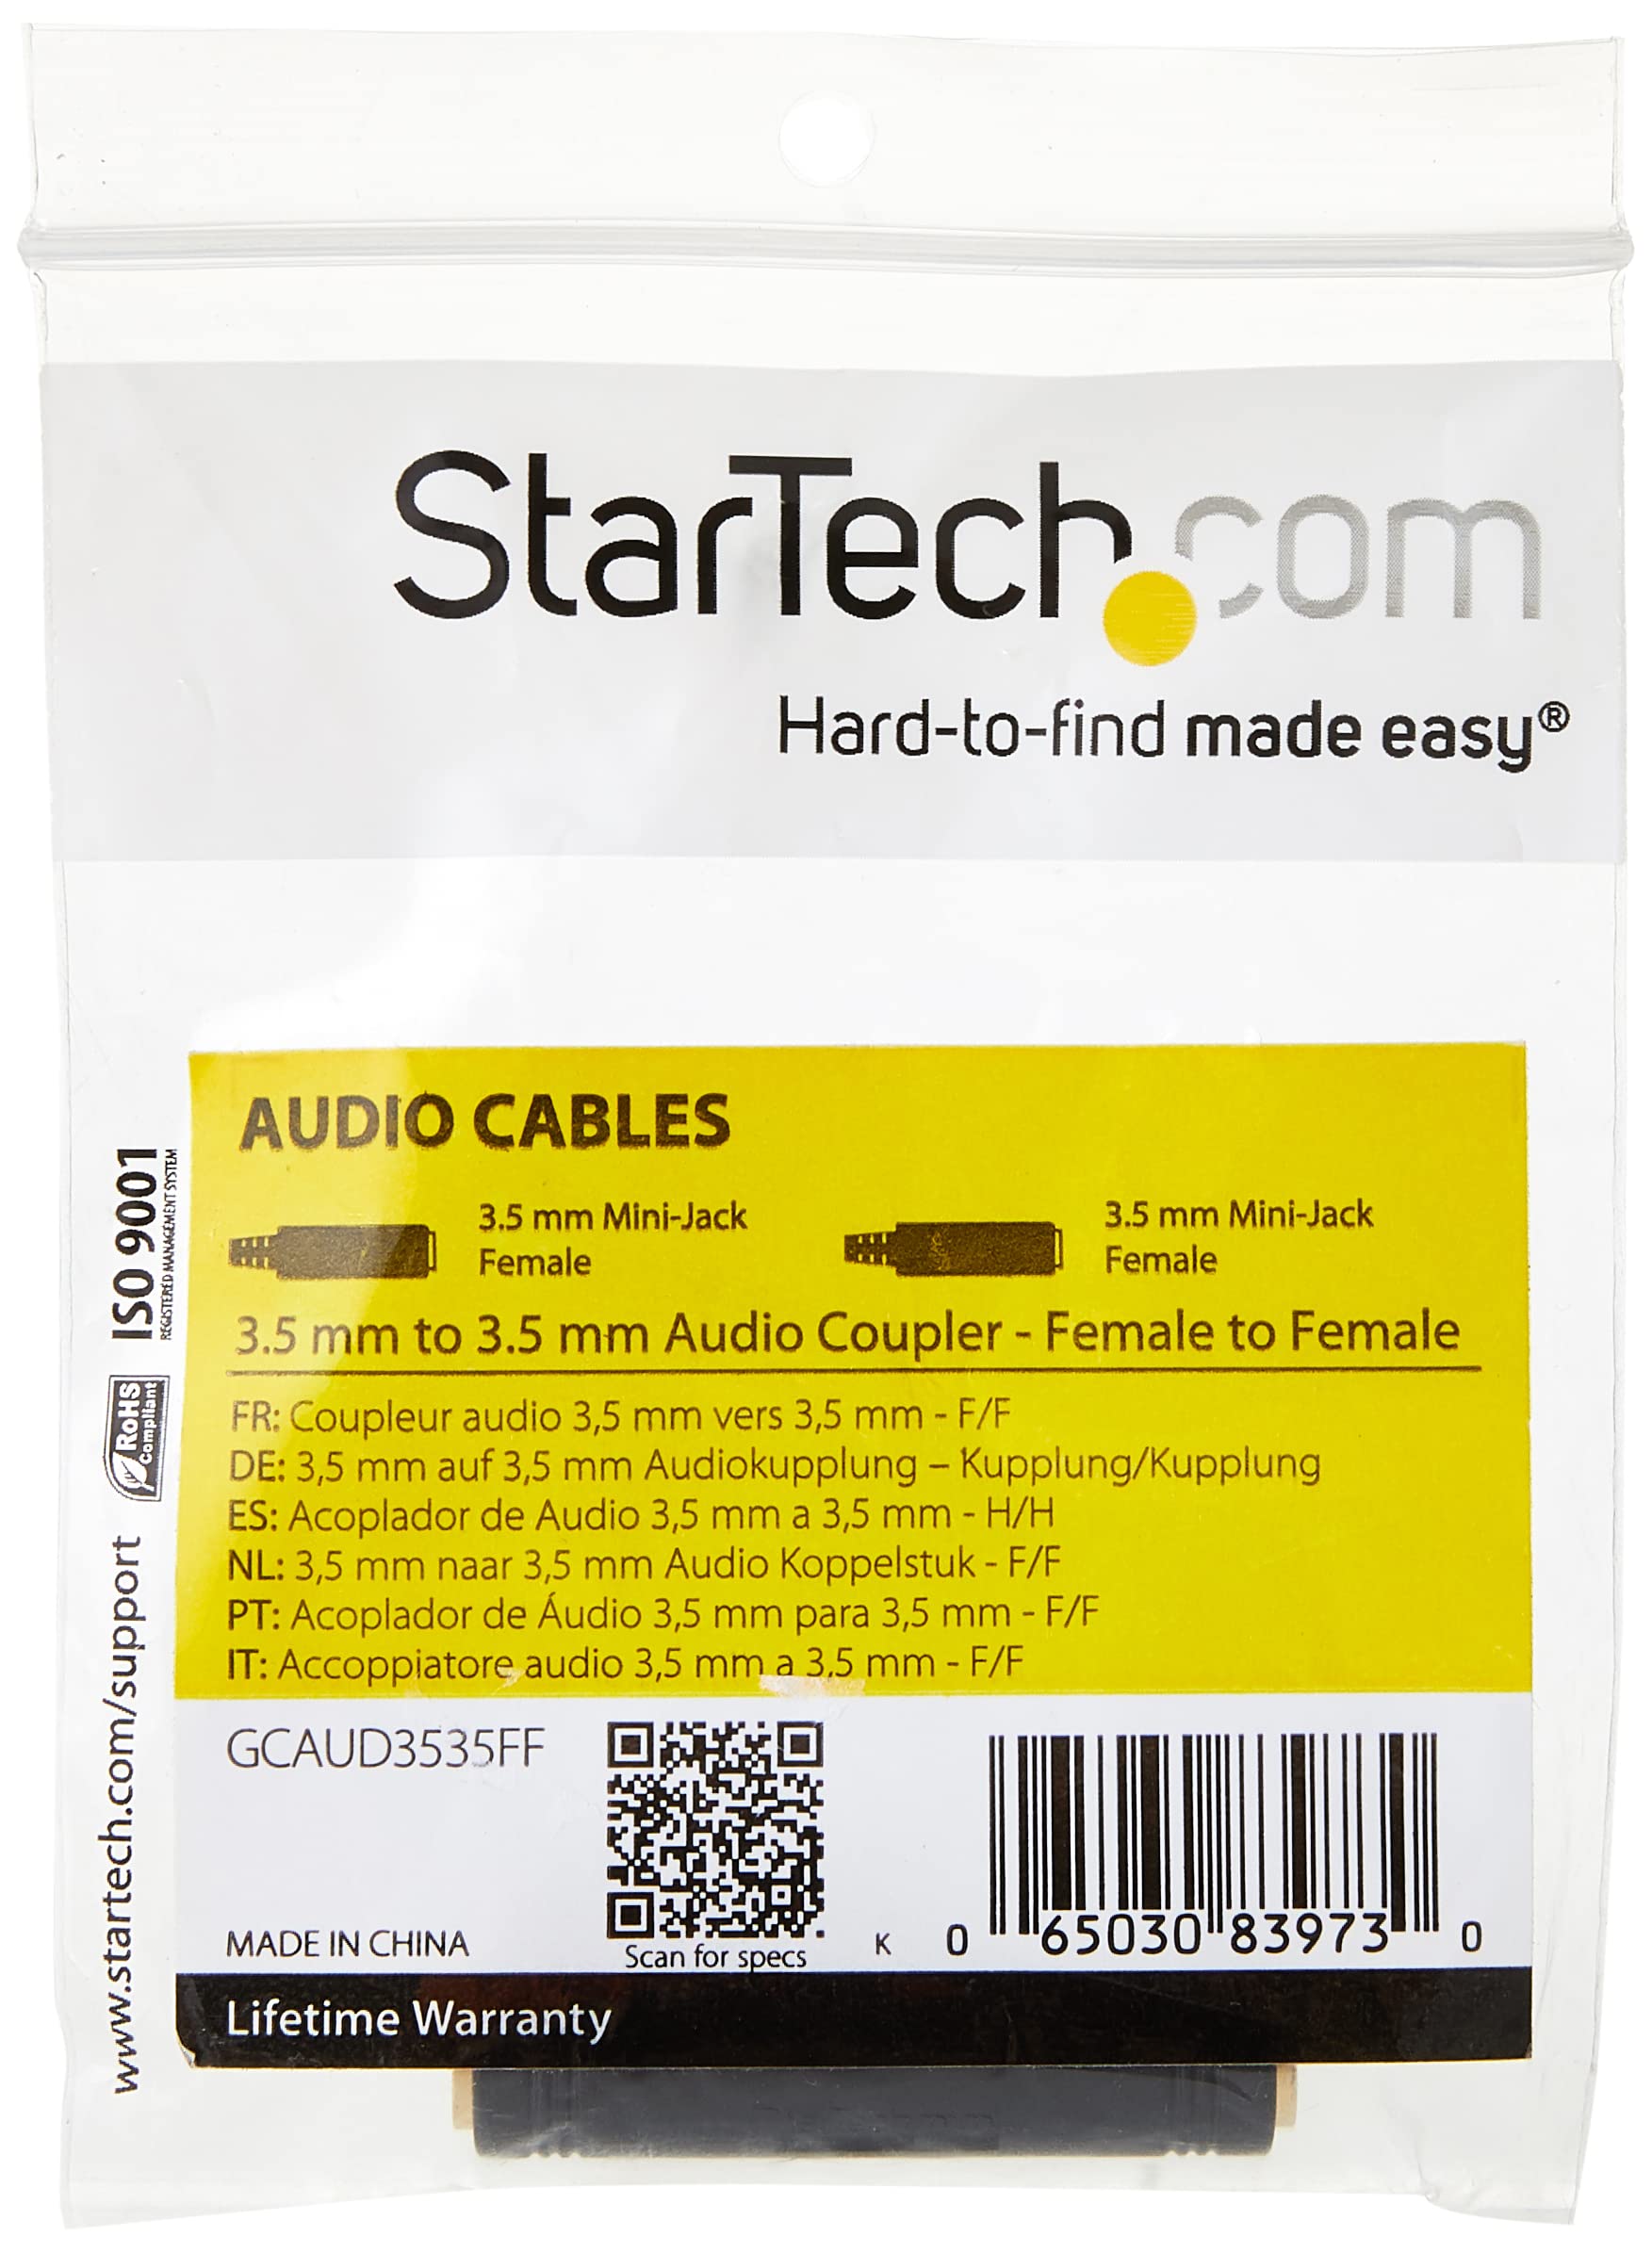 StarTech.com 3.5mm Female to Female Coupler - 3.5mm Audio Coupler - Gold Plated Connectors - Female/Female - Aux Cord Adapter (GCAUD3535FF),Black